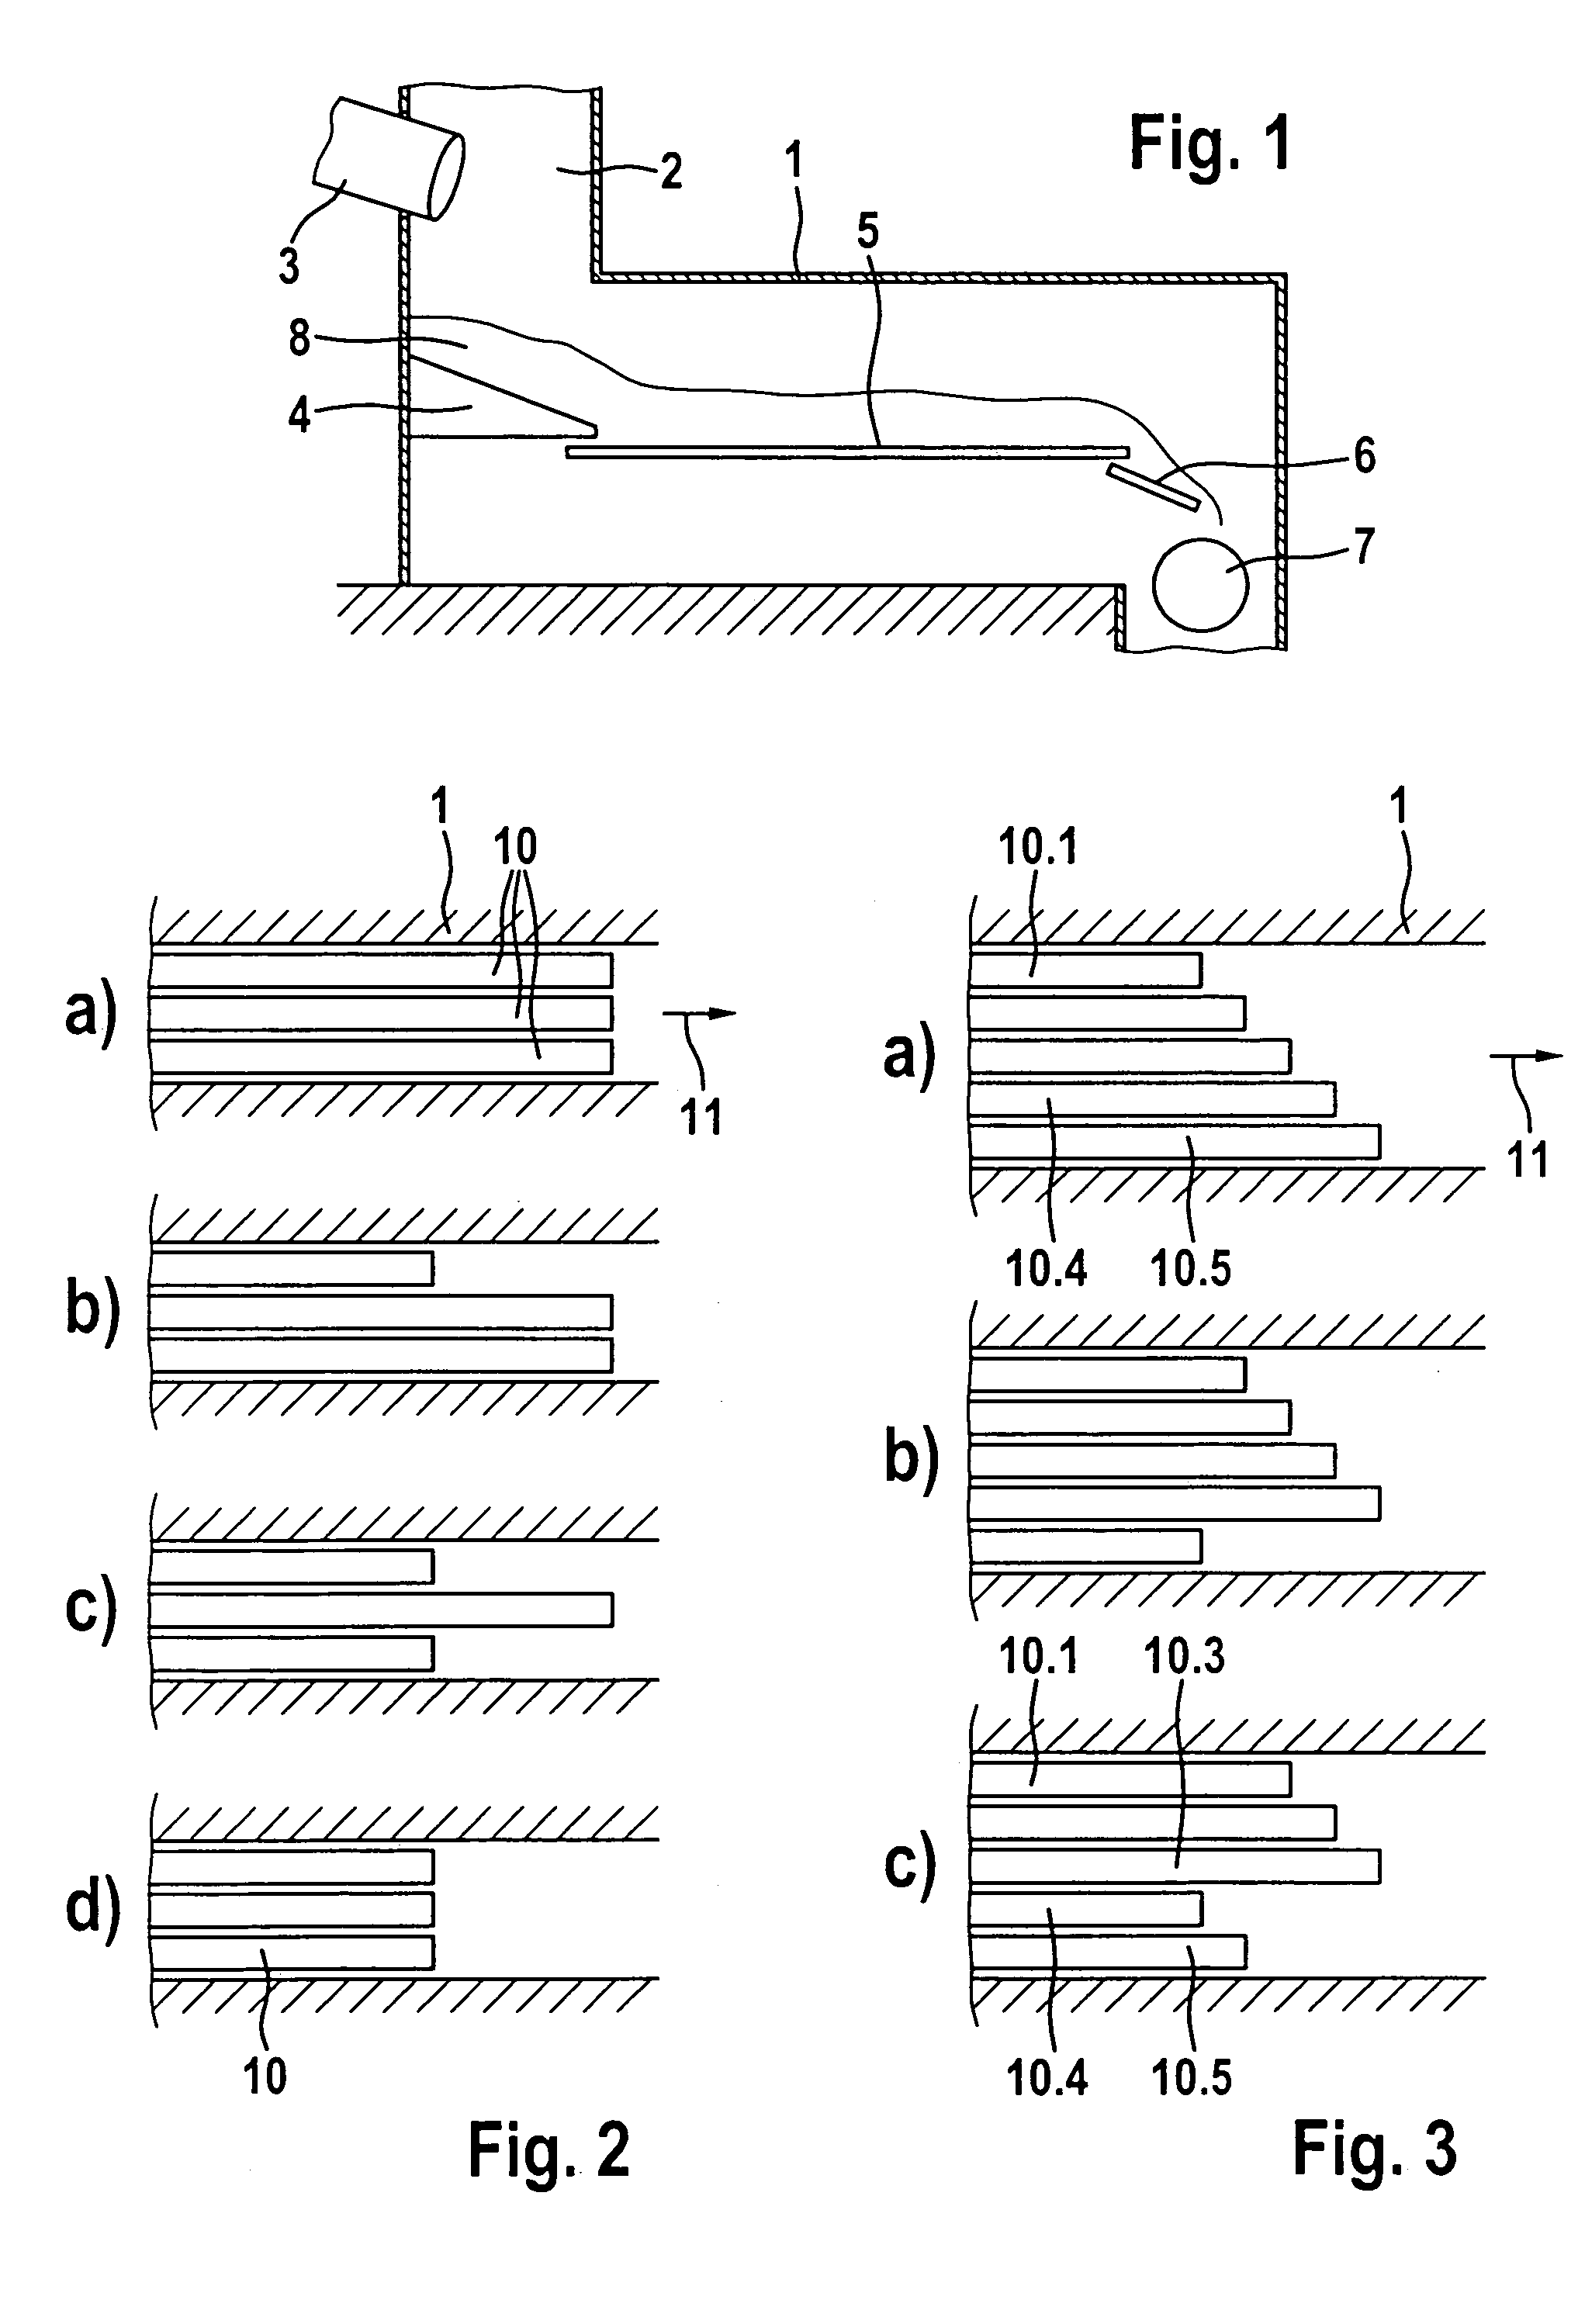 Method and apparatus for treating a layer of bulk material